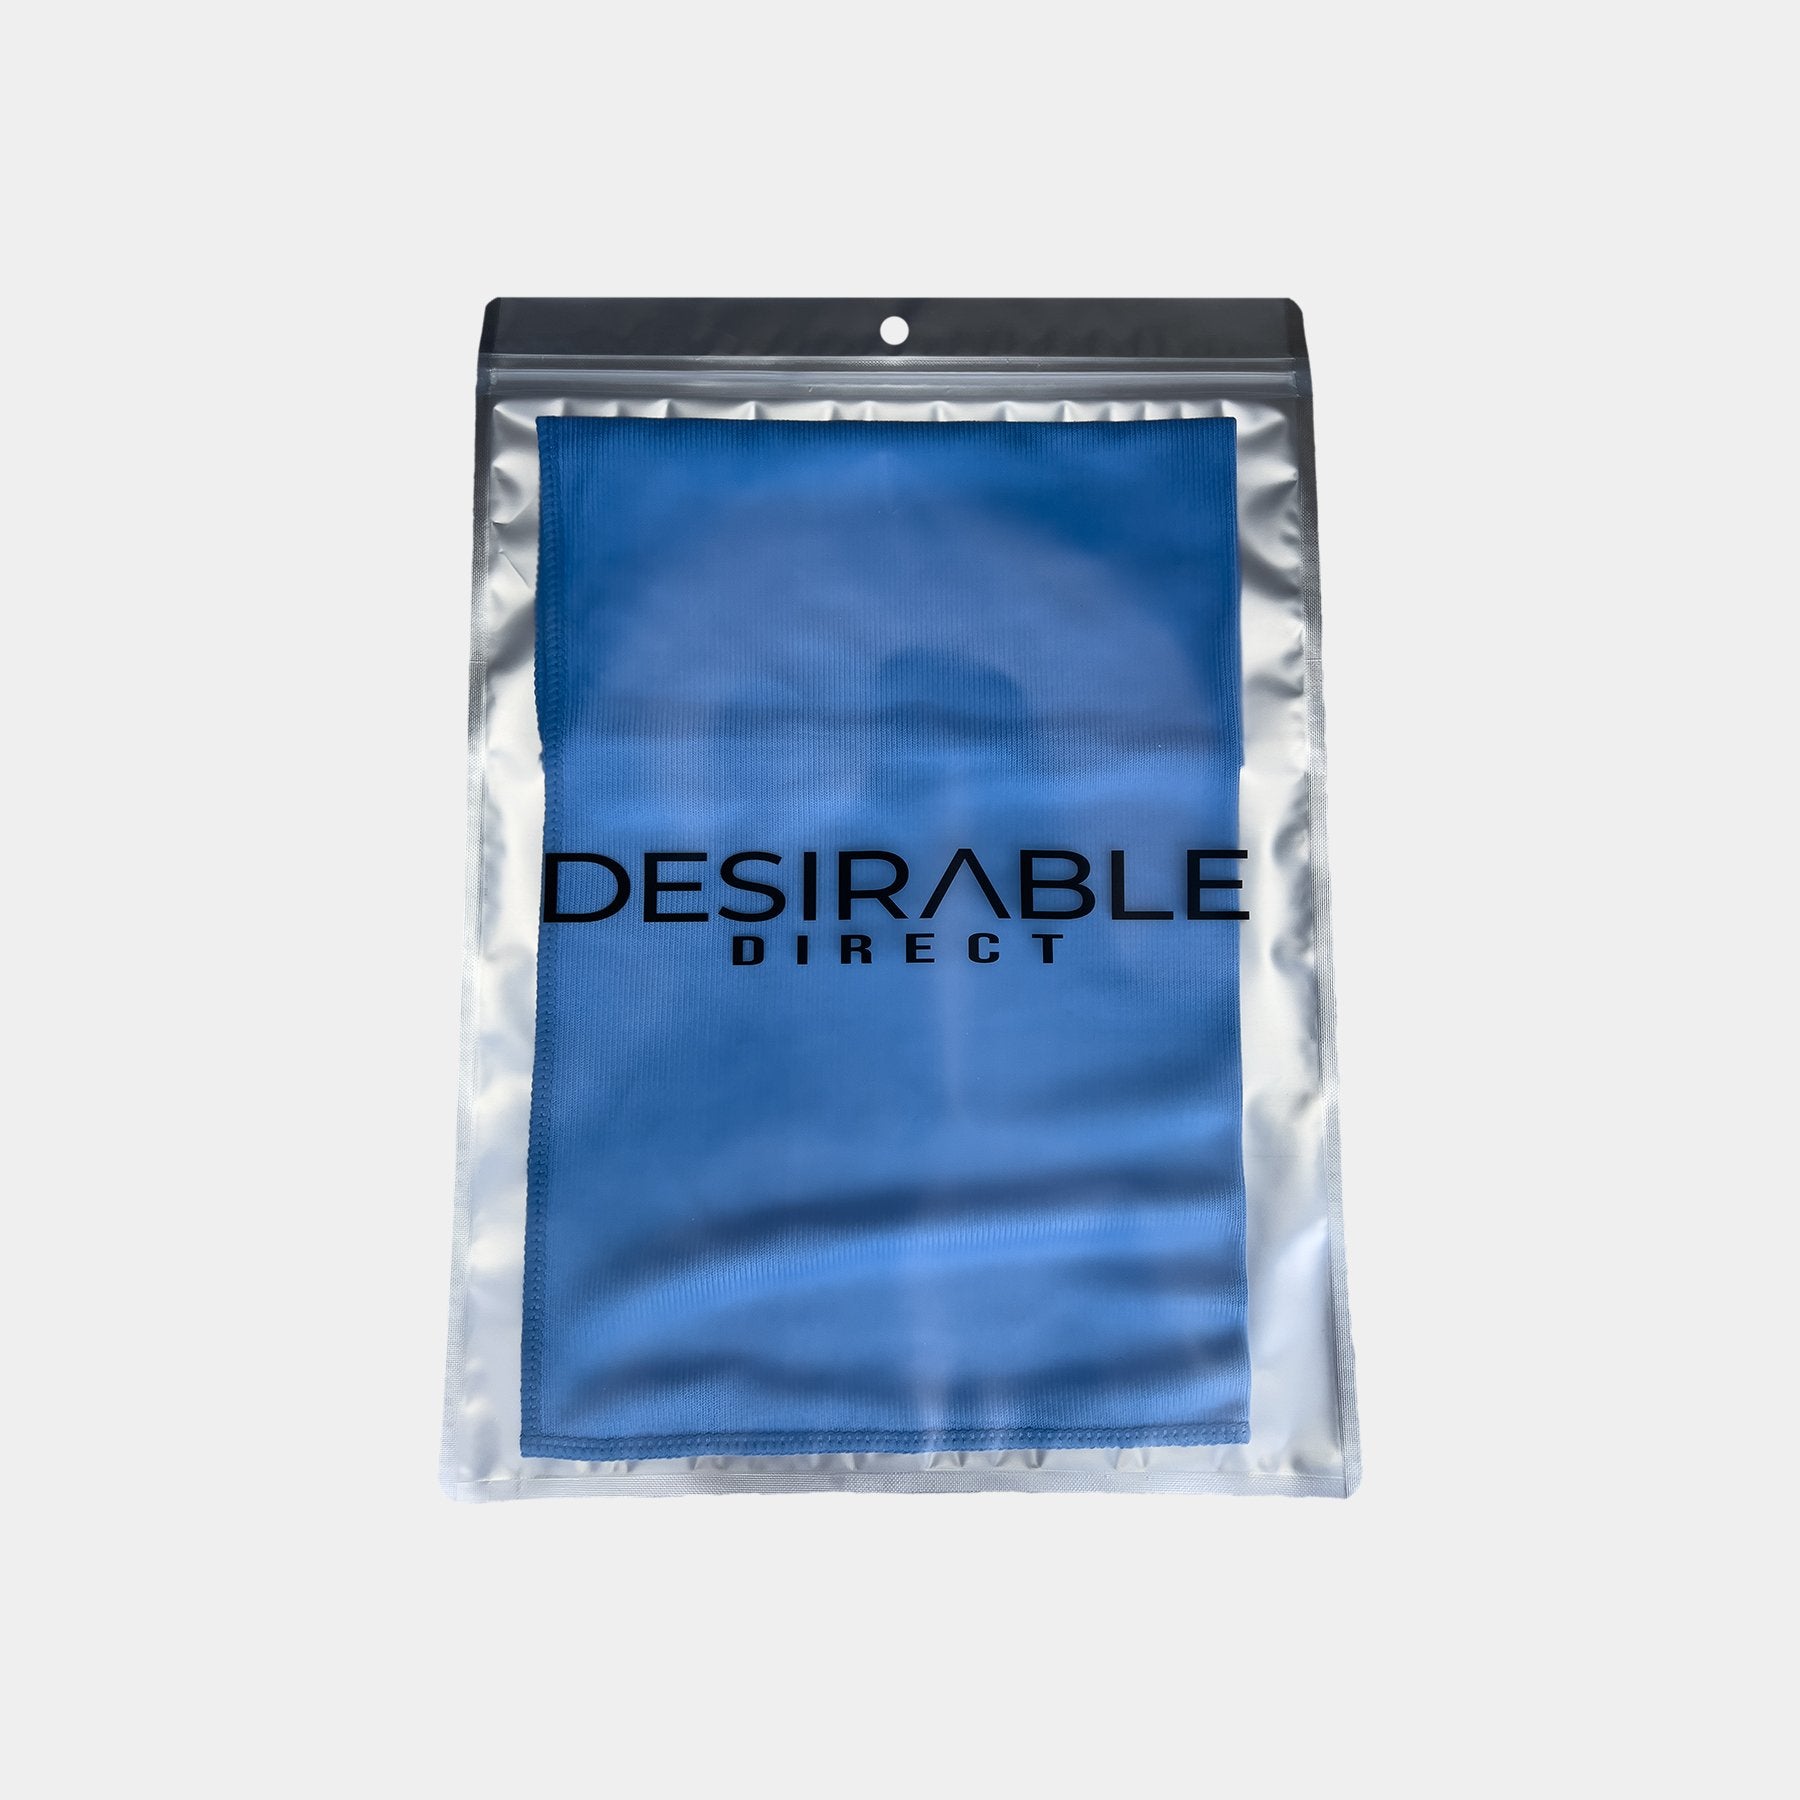 Car care microfibre blue glass cloth 40x40cm displayed on a white background in silver packaging with desirable direct printed on the front to keep the item clean when not in use.